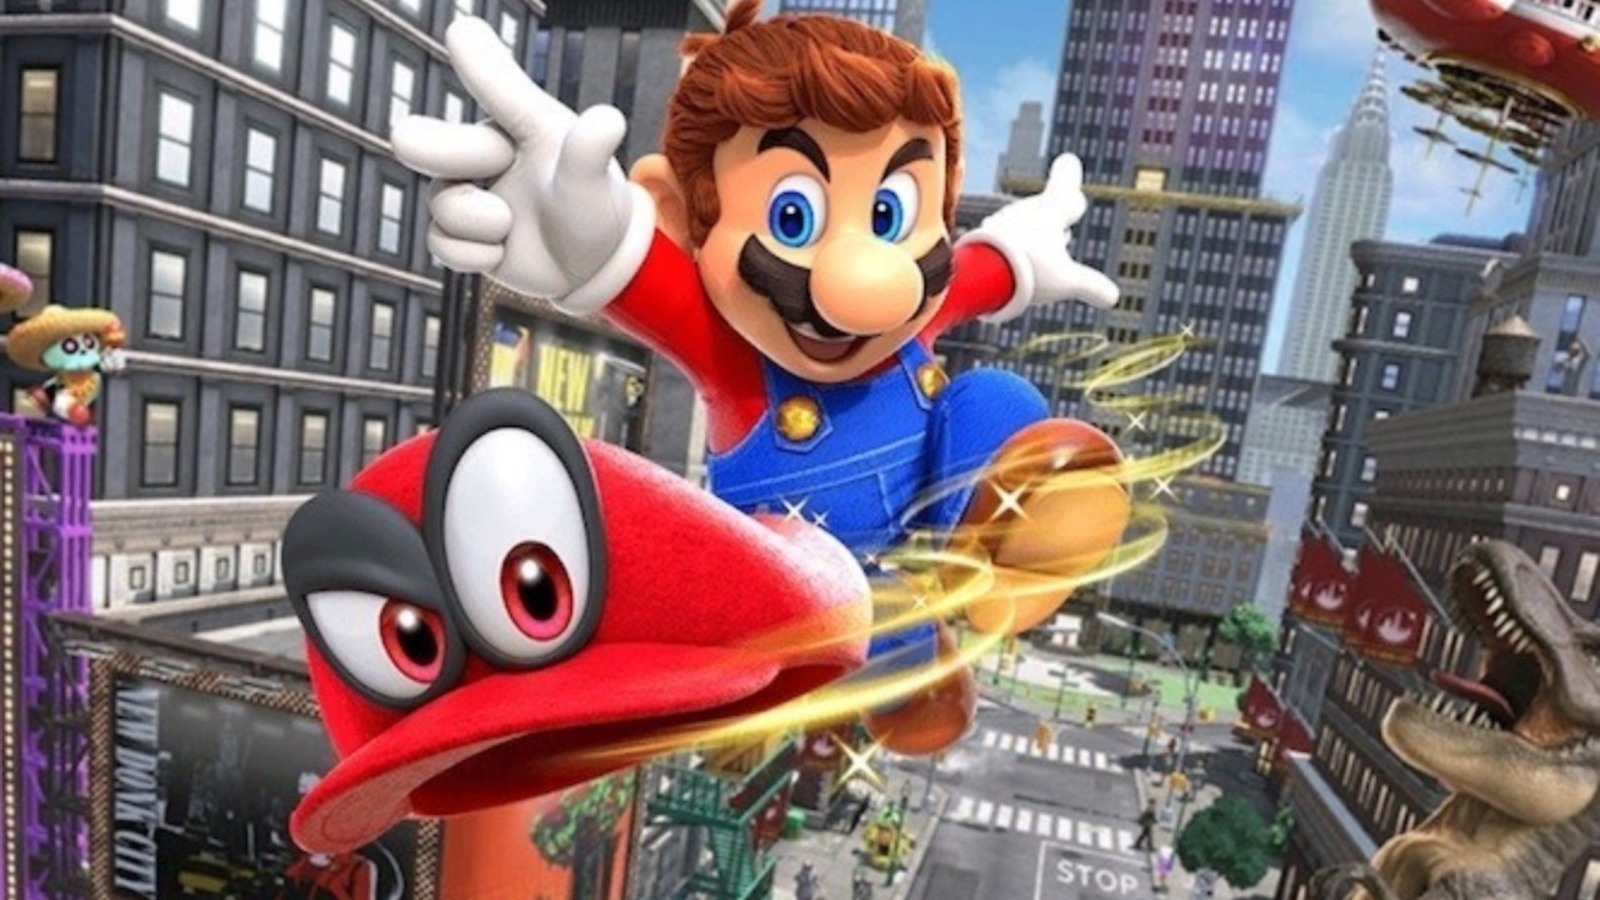 The Super Mario Bros. Film Hits A Warp Zone To A Spring 2023 Release